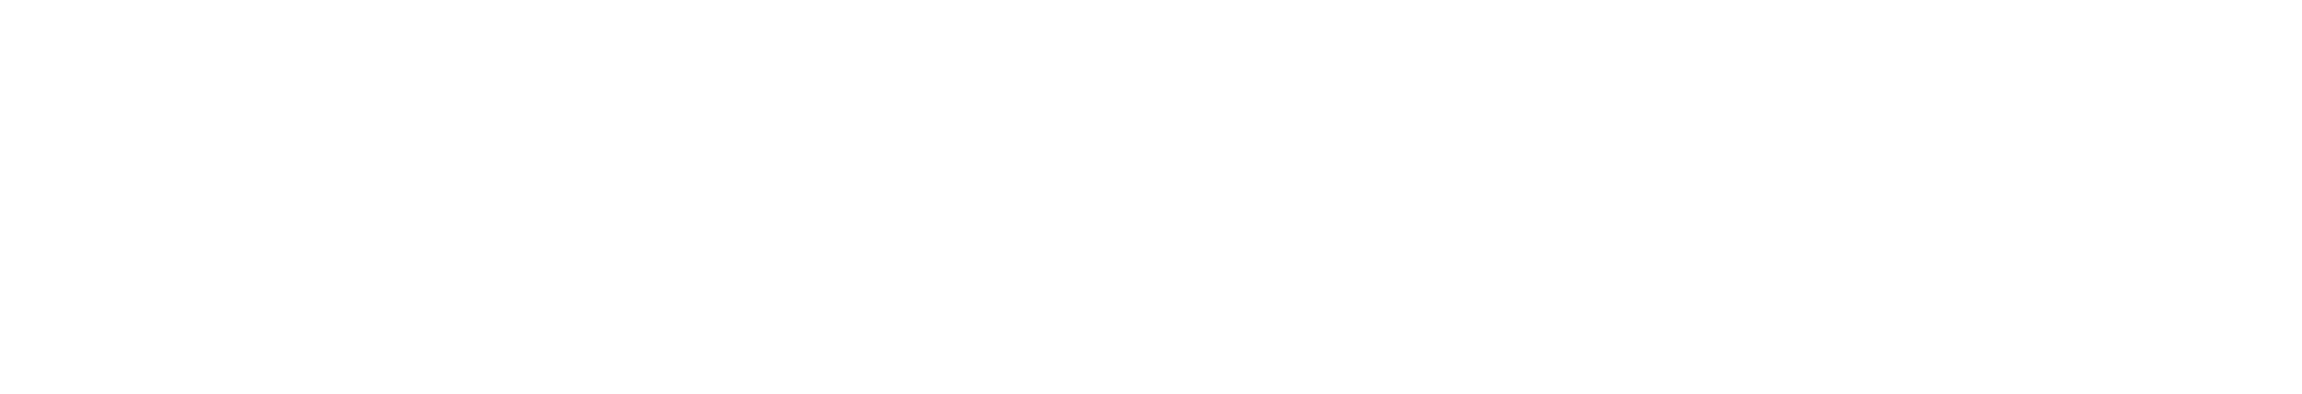 KU Institute for Policy & Social Research